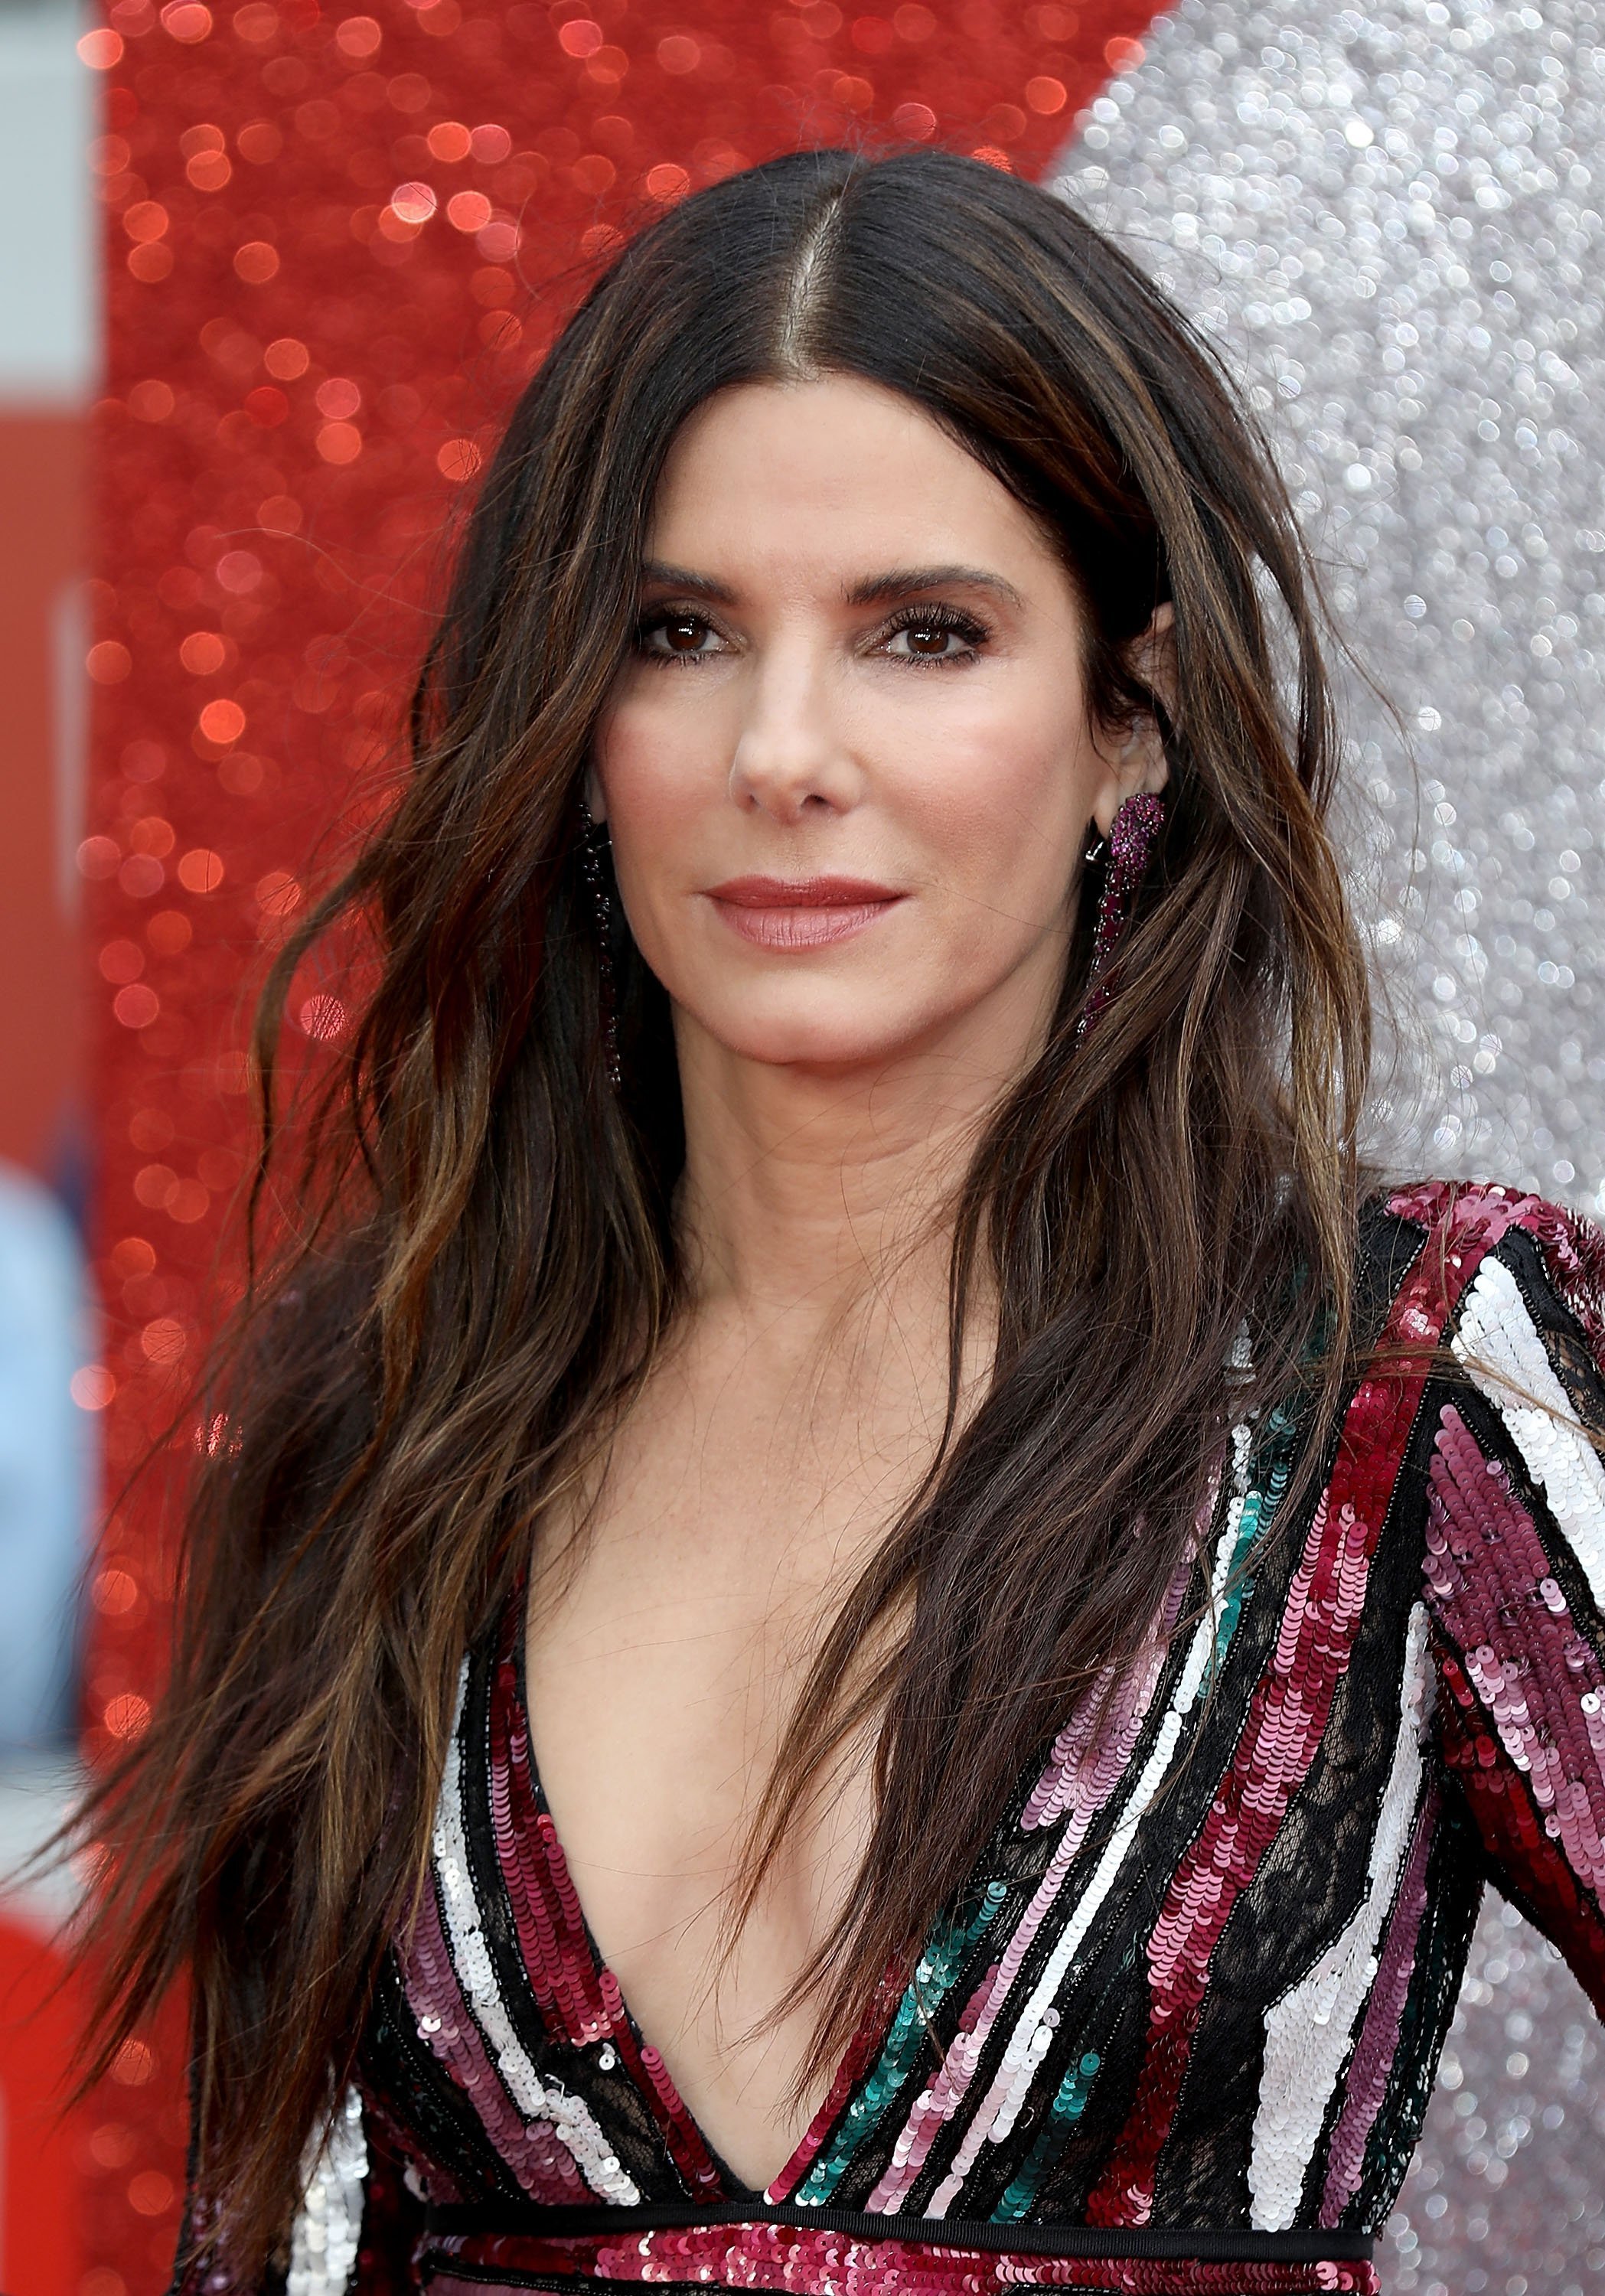 Sandra Bullock attends the 'Ocean's 8' UK Premiere held at Cineworld Leicester Square on June 13, 2018 | Photo: GettyImages